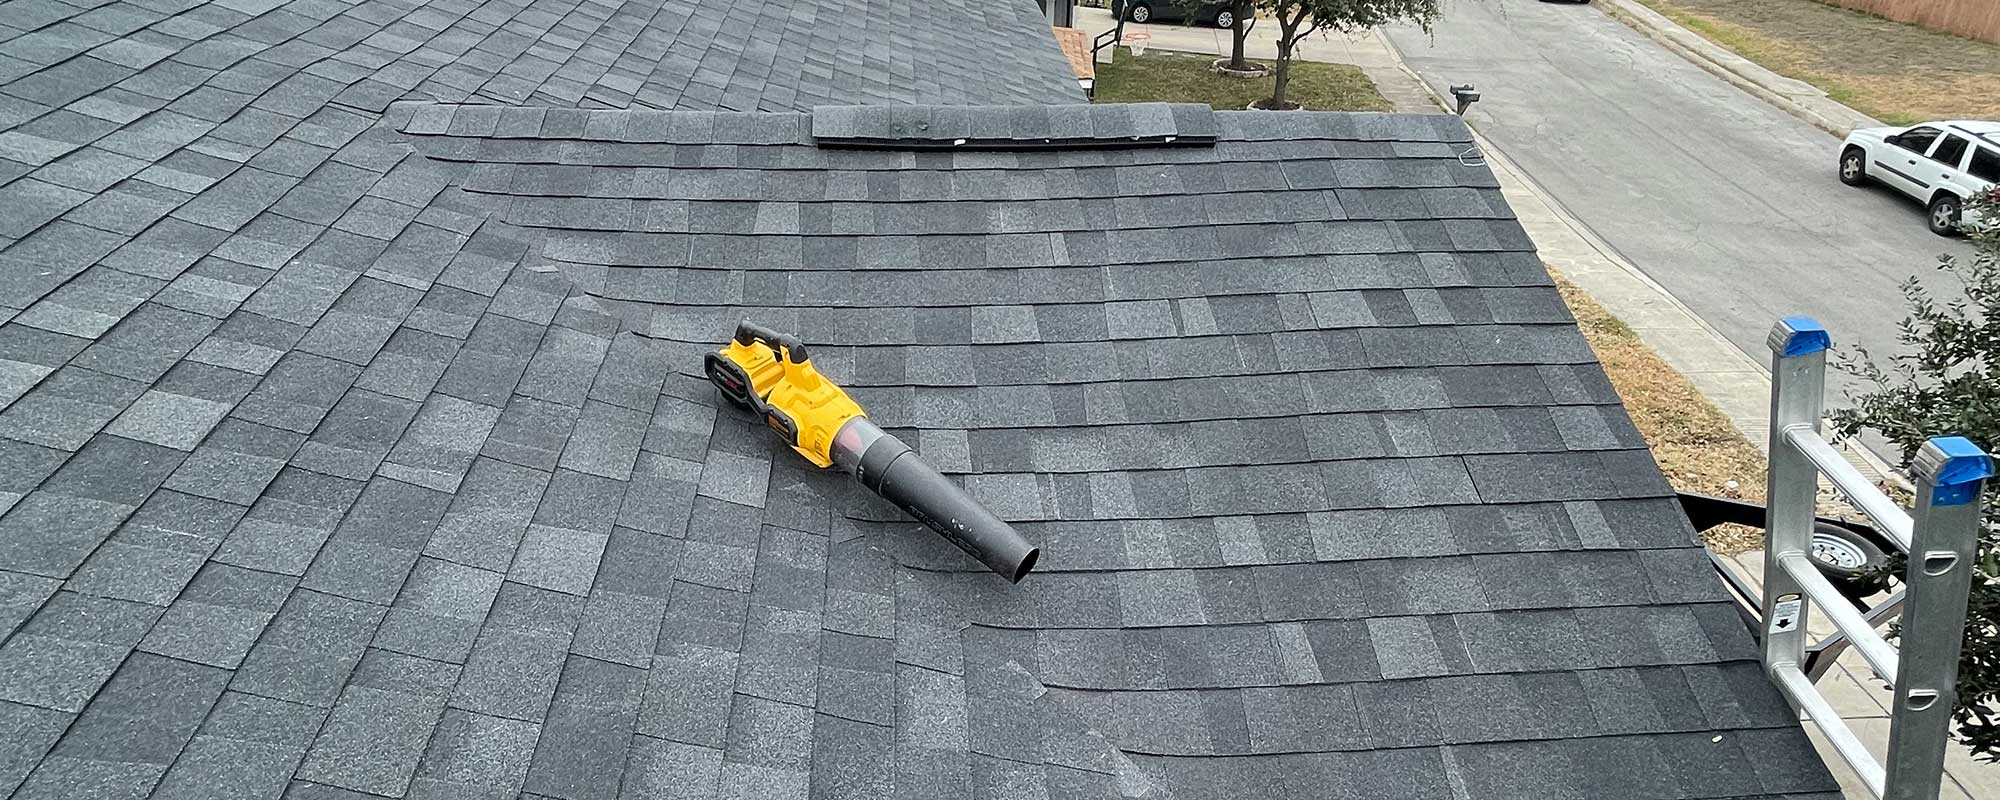 Why and When Does a Roof Need to Be Replaced?